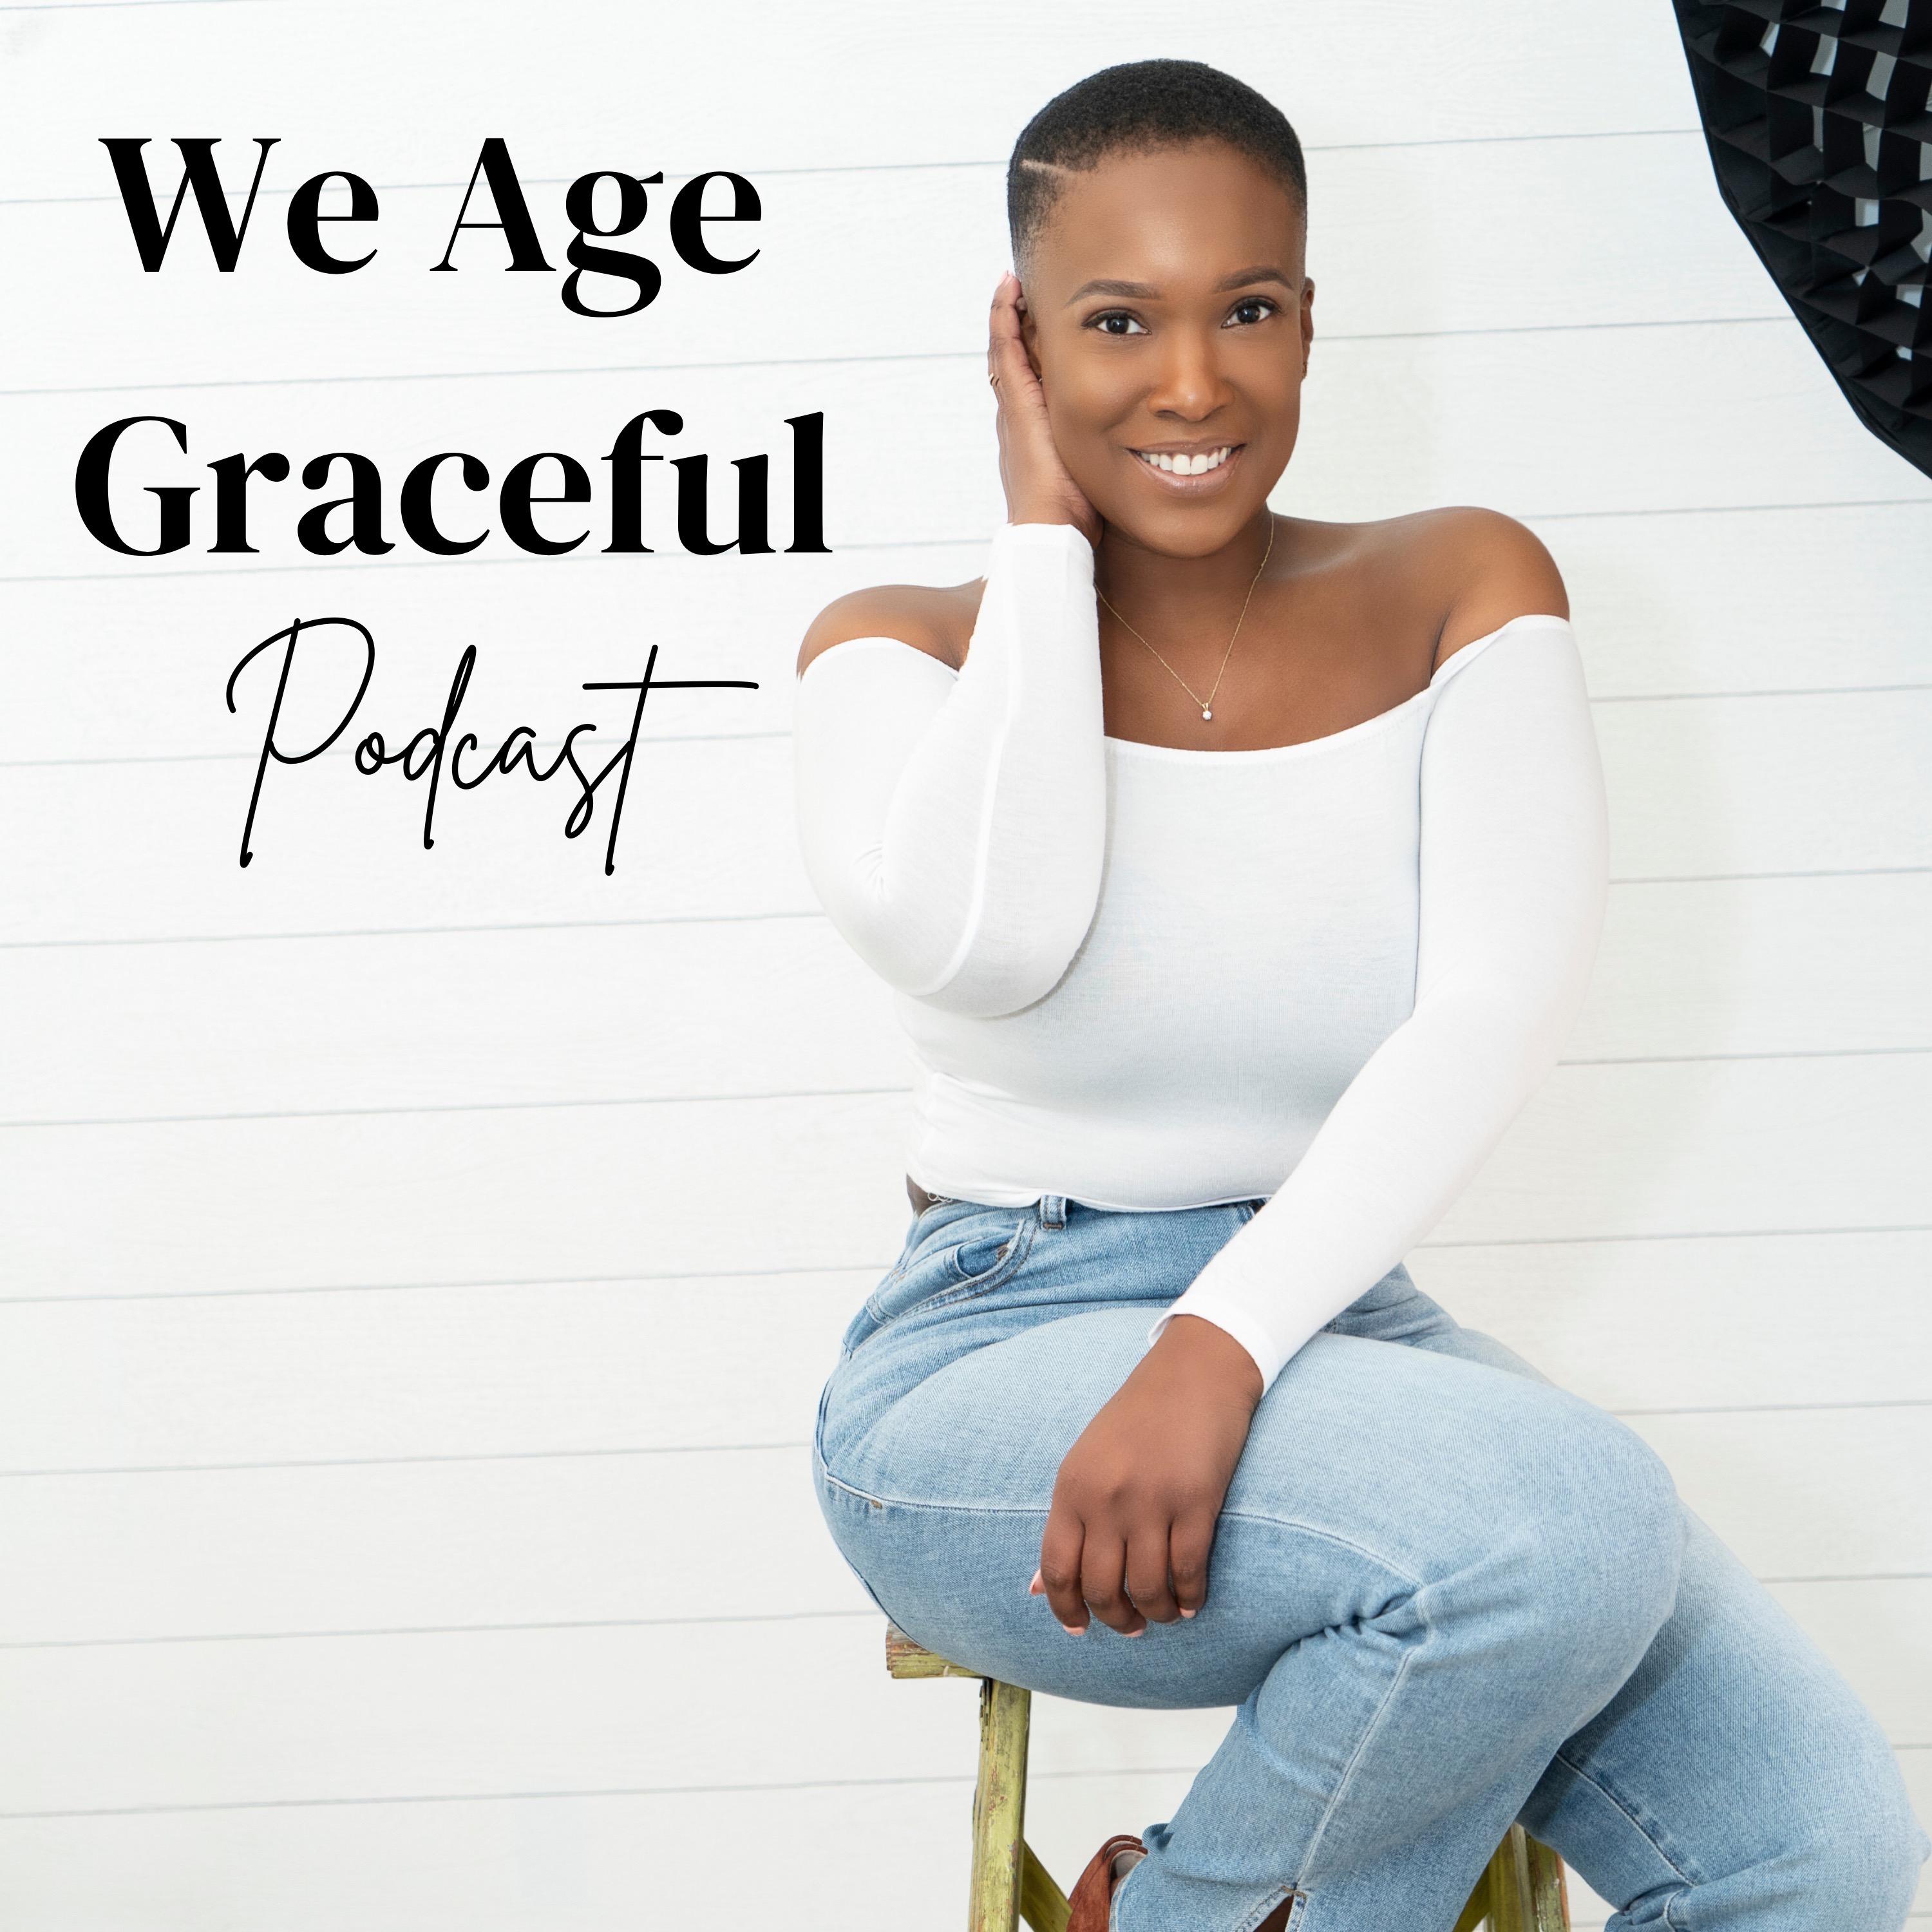 We Age Graceful Podcast